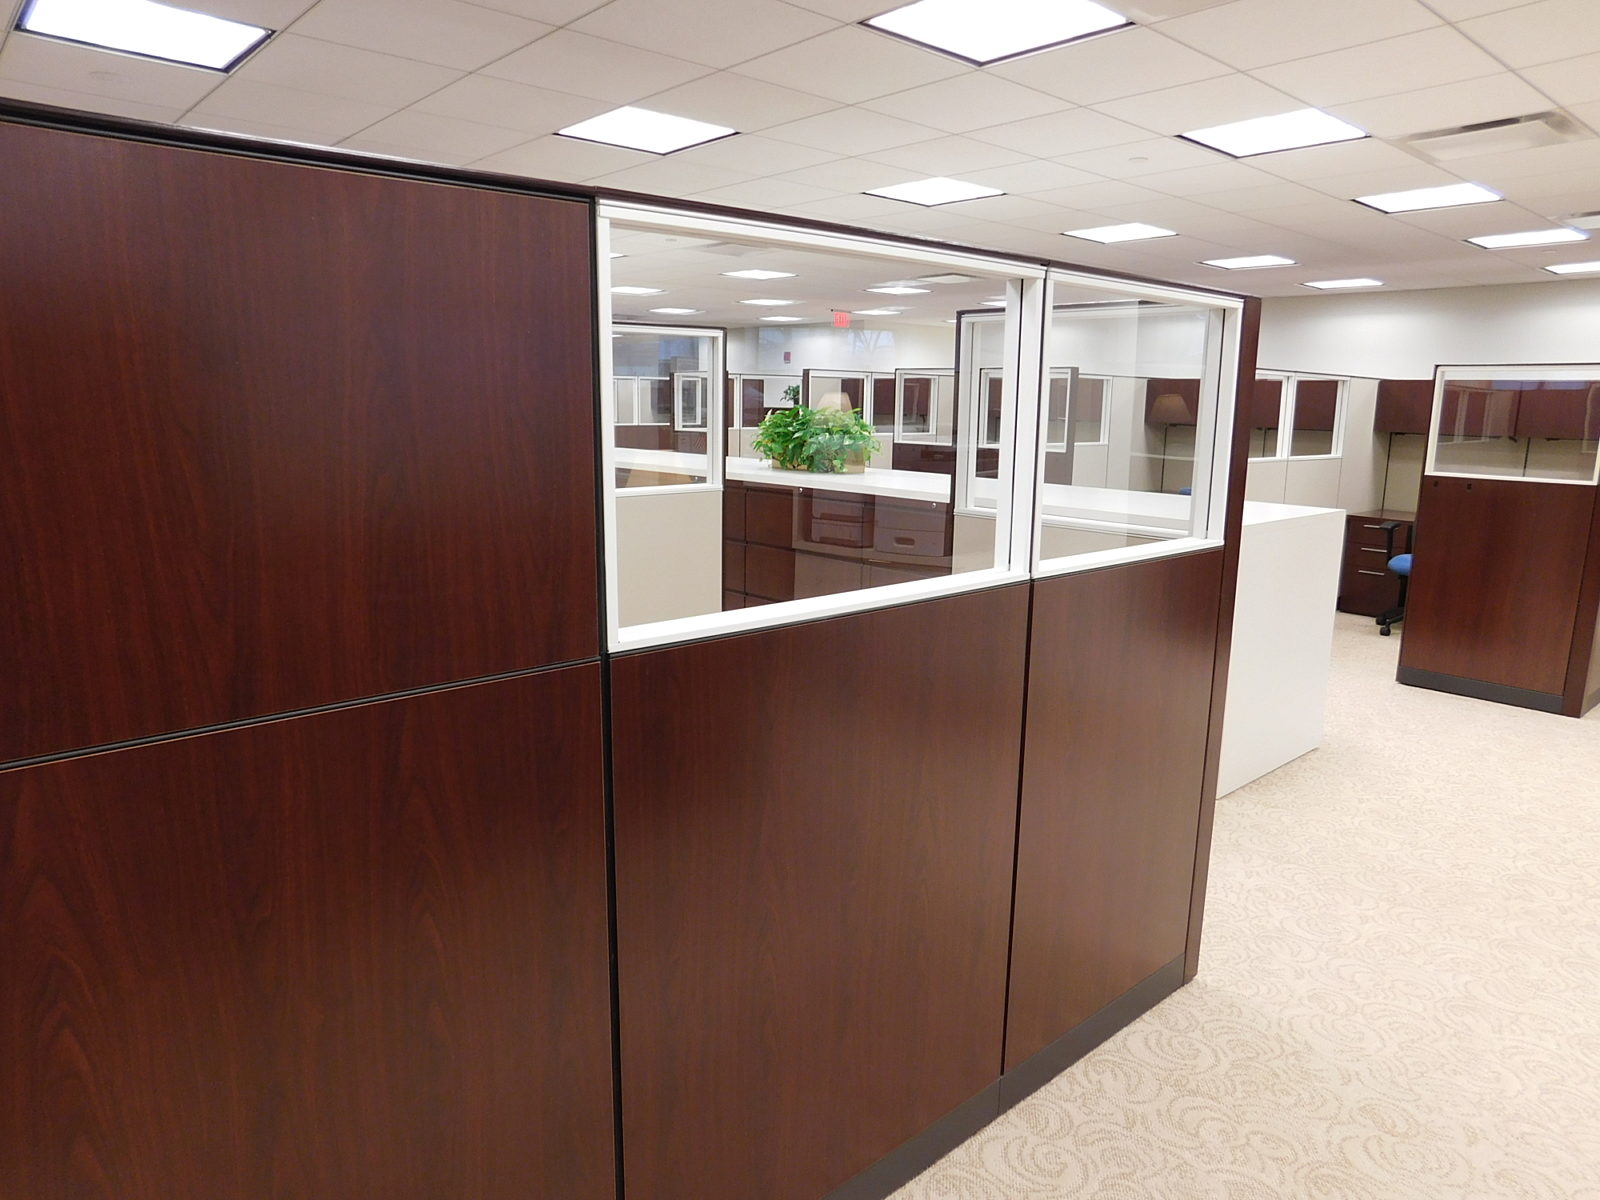 View of exterior of workstations, veneer panels with clear glass stackers